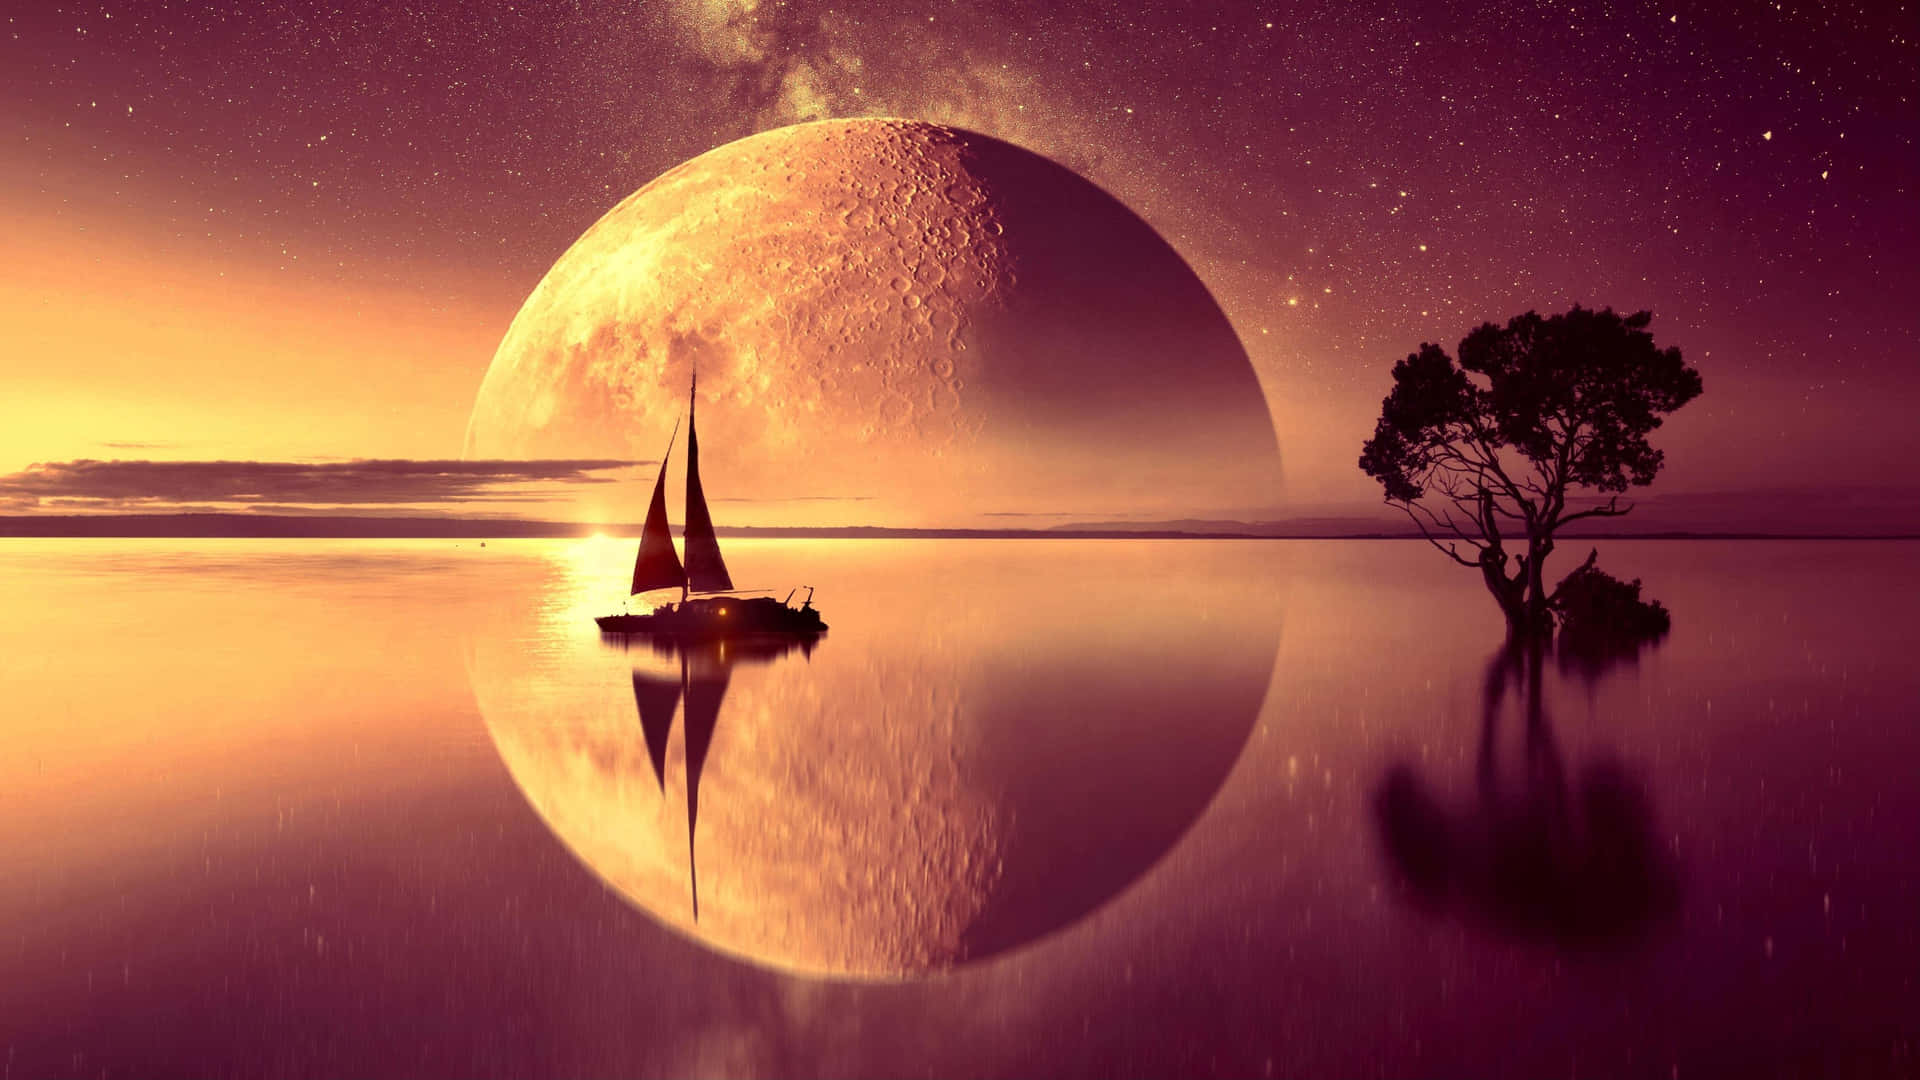 A Sailboat Is Reflected In The Water With A Moon Wallpaper